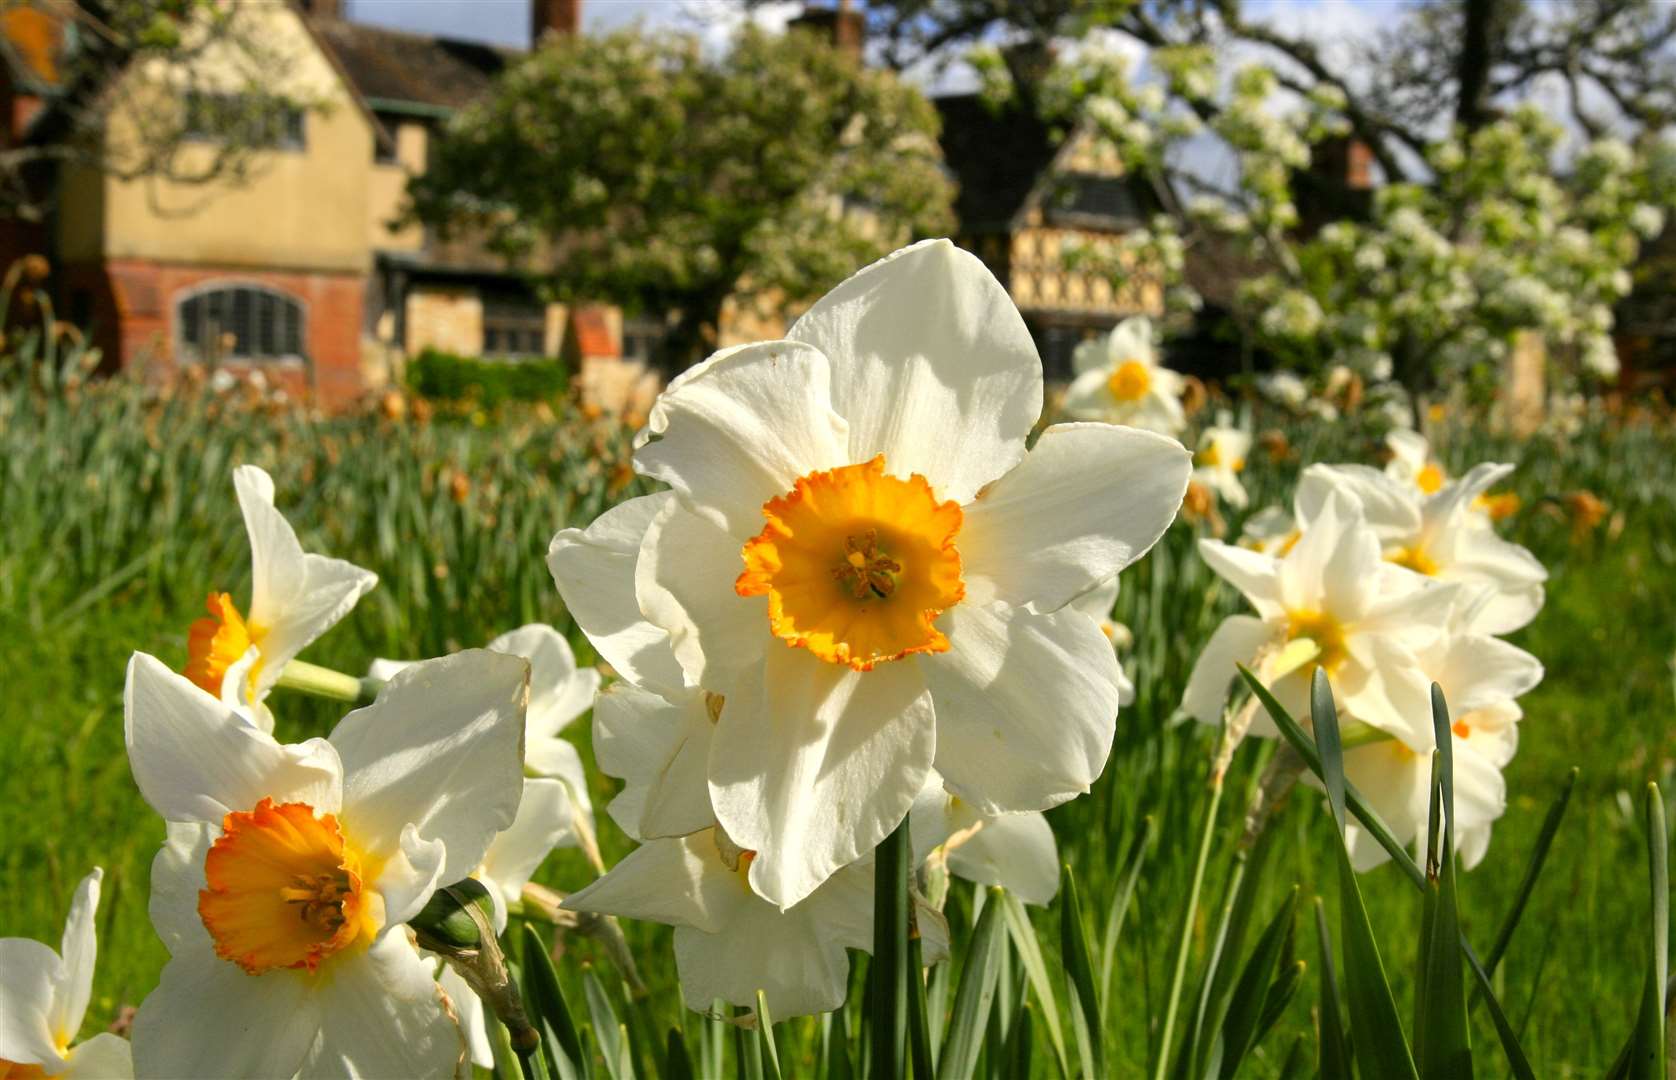 Dazzling Daffodils are coming to Hever